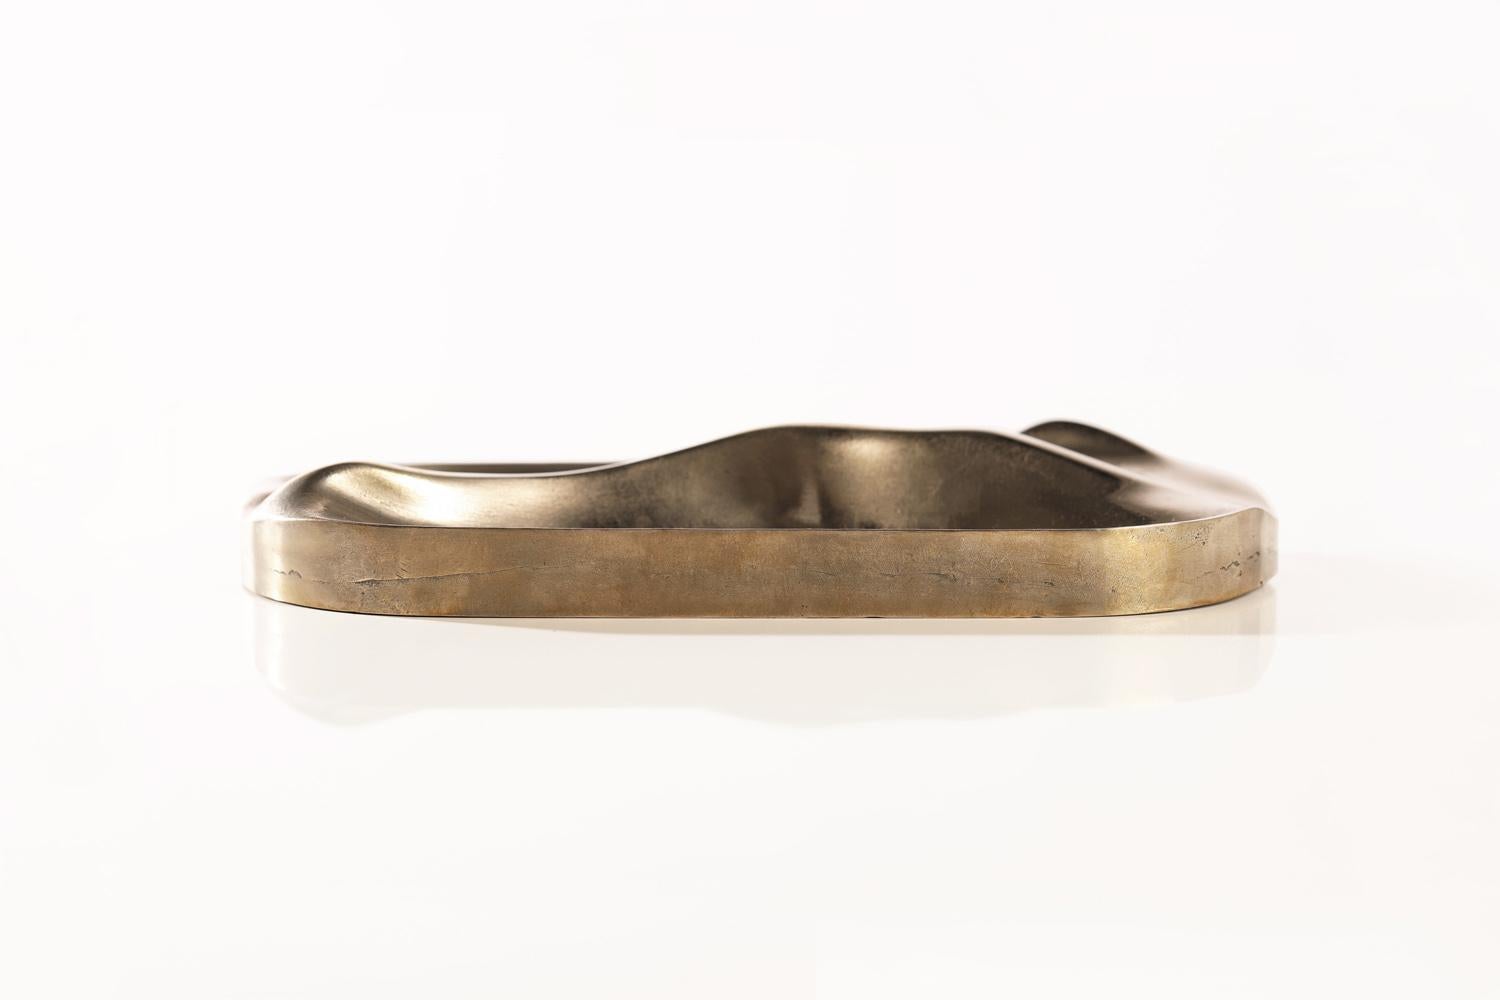 American Small Bronze Tray by Artist Vincent Pocsik for Lawson-Fenning, in Stock